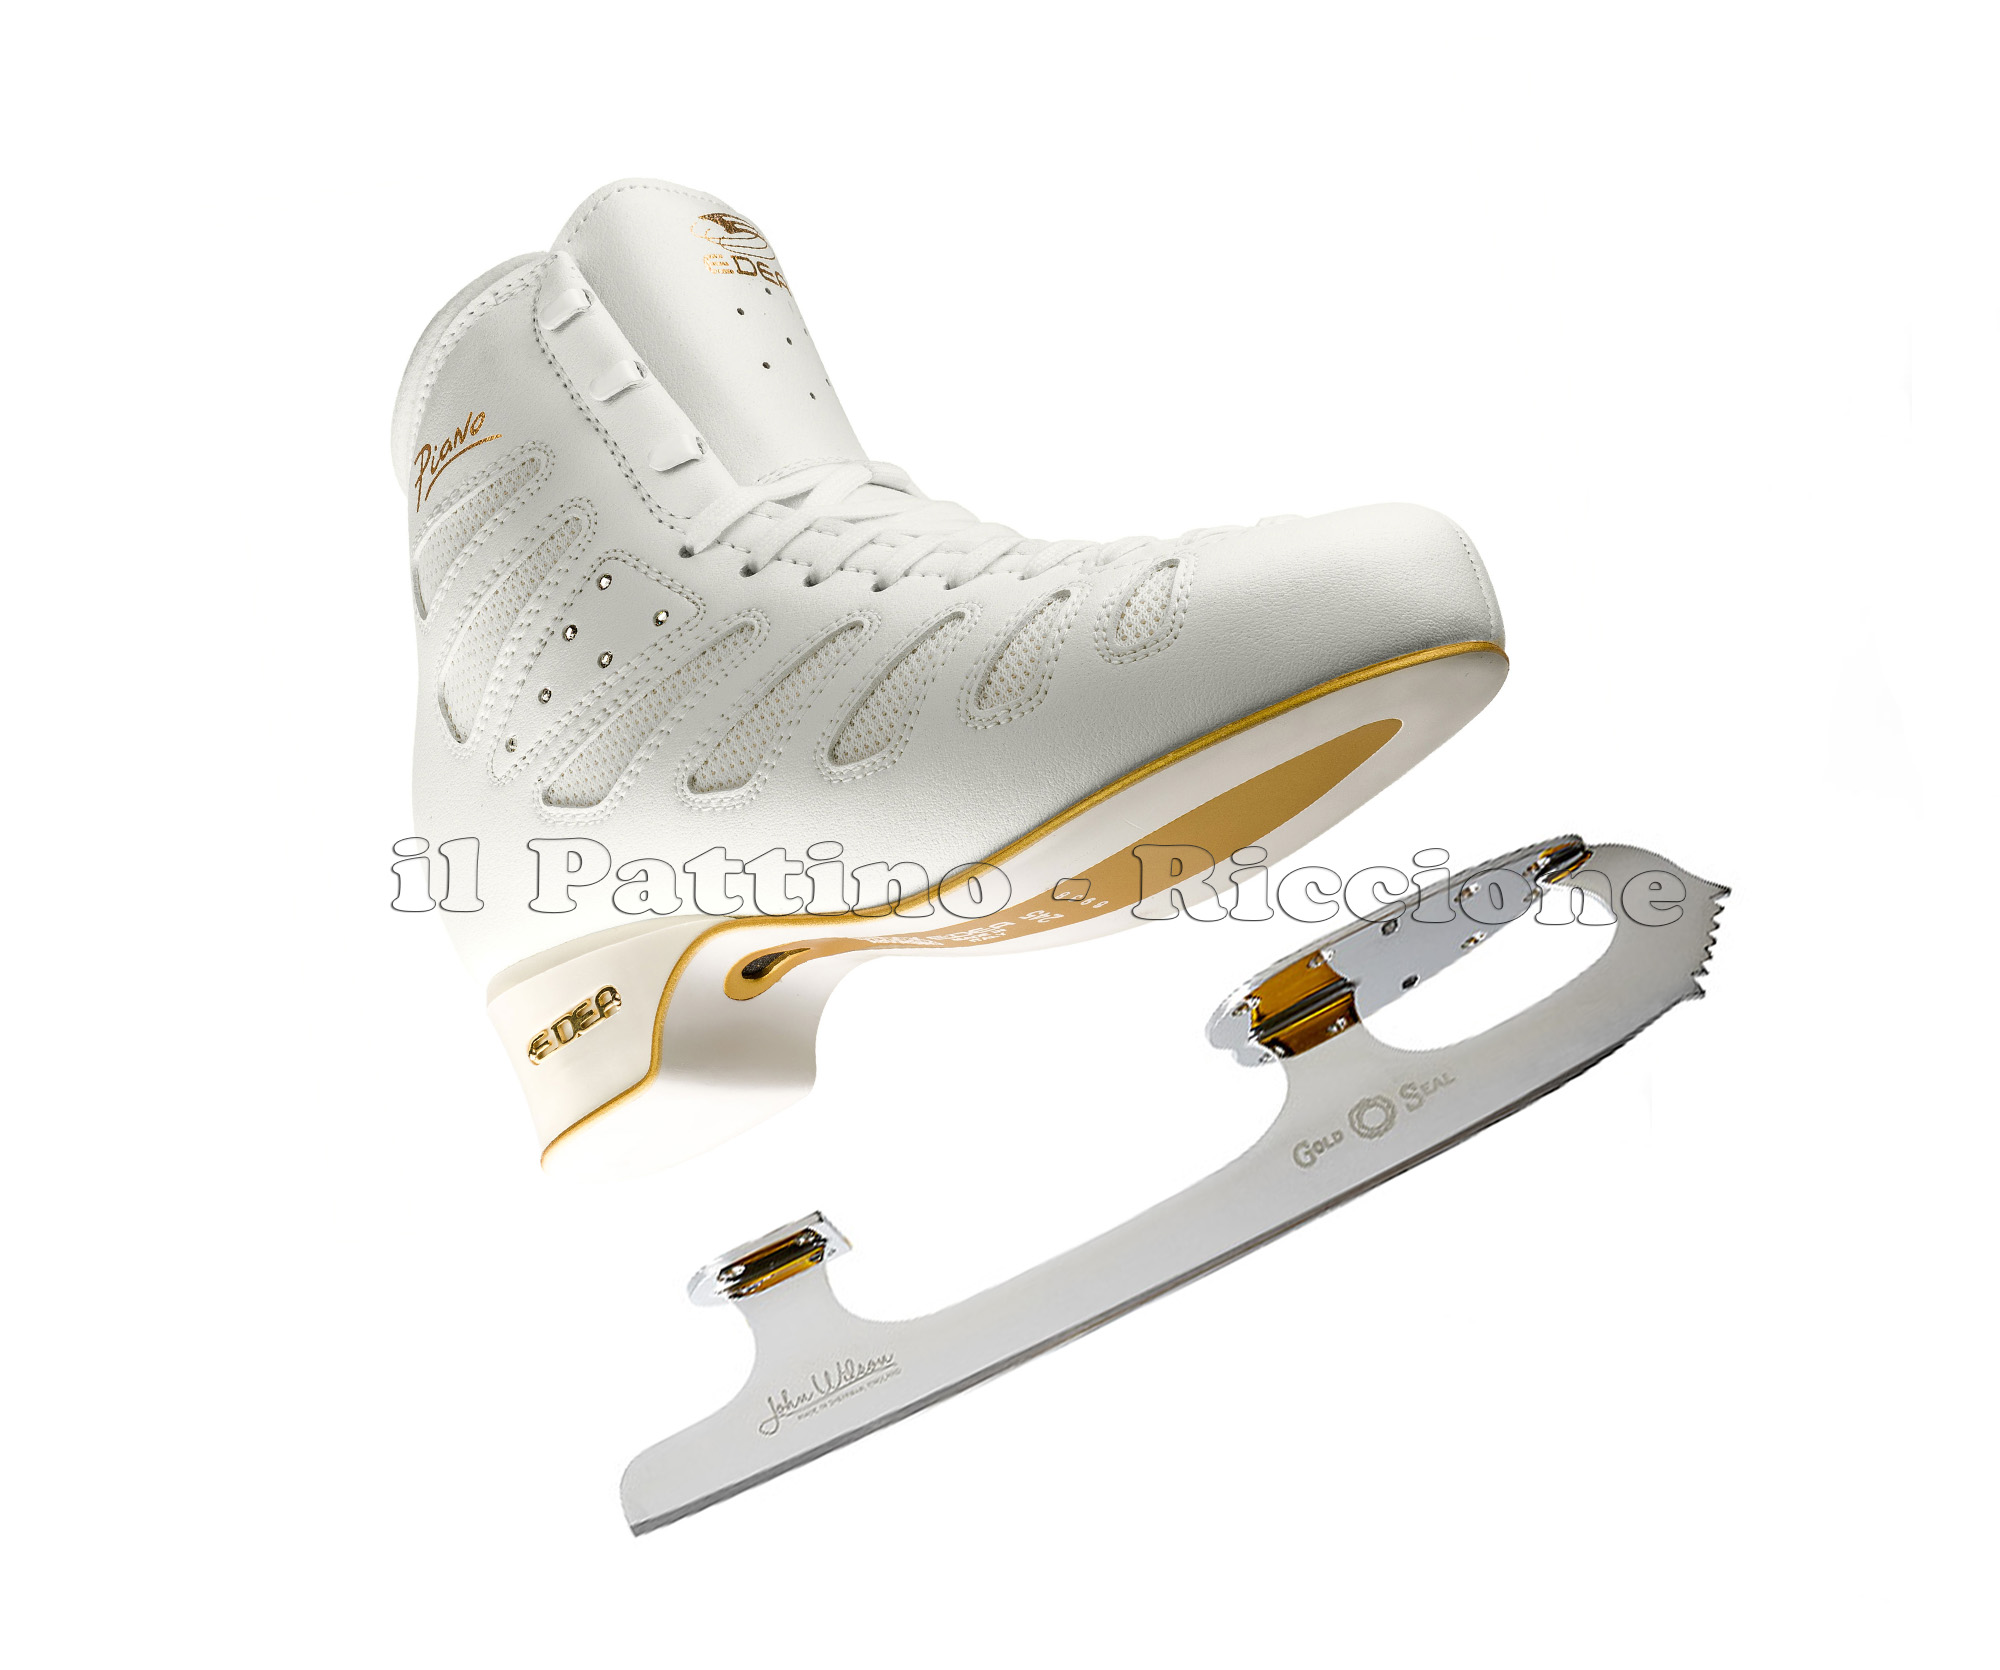 email us for best price NEW John Wilson GOLD SEAL Ice Skating Blades 